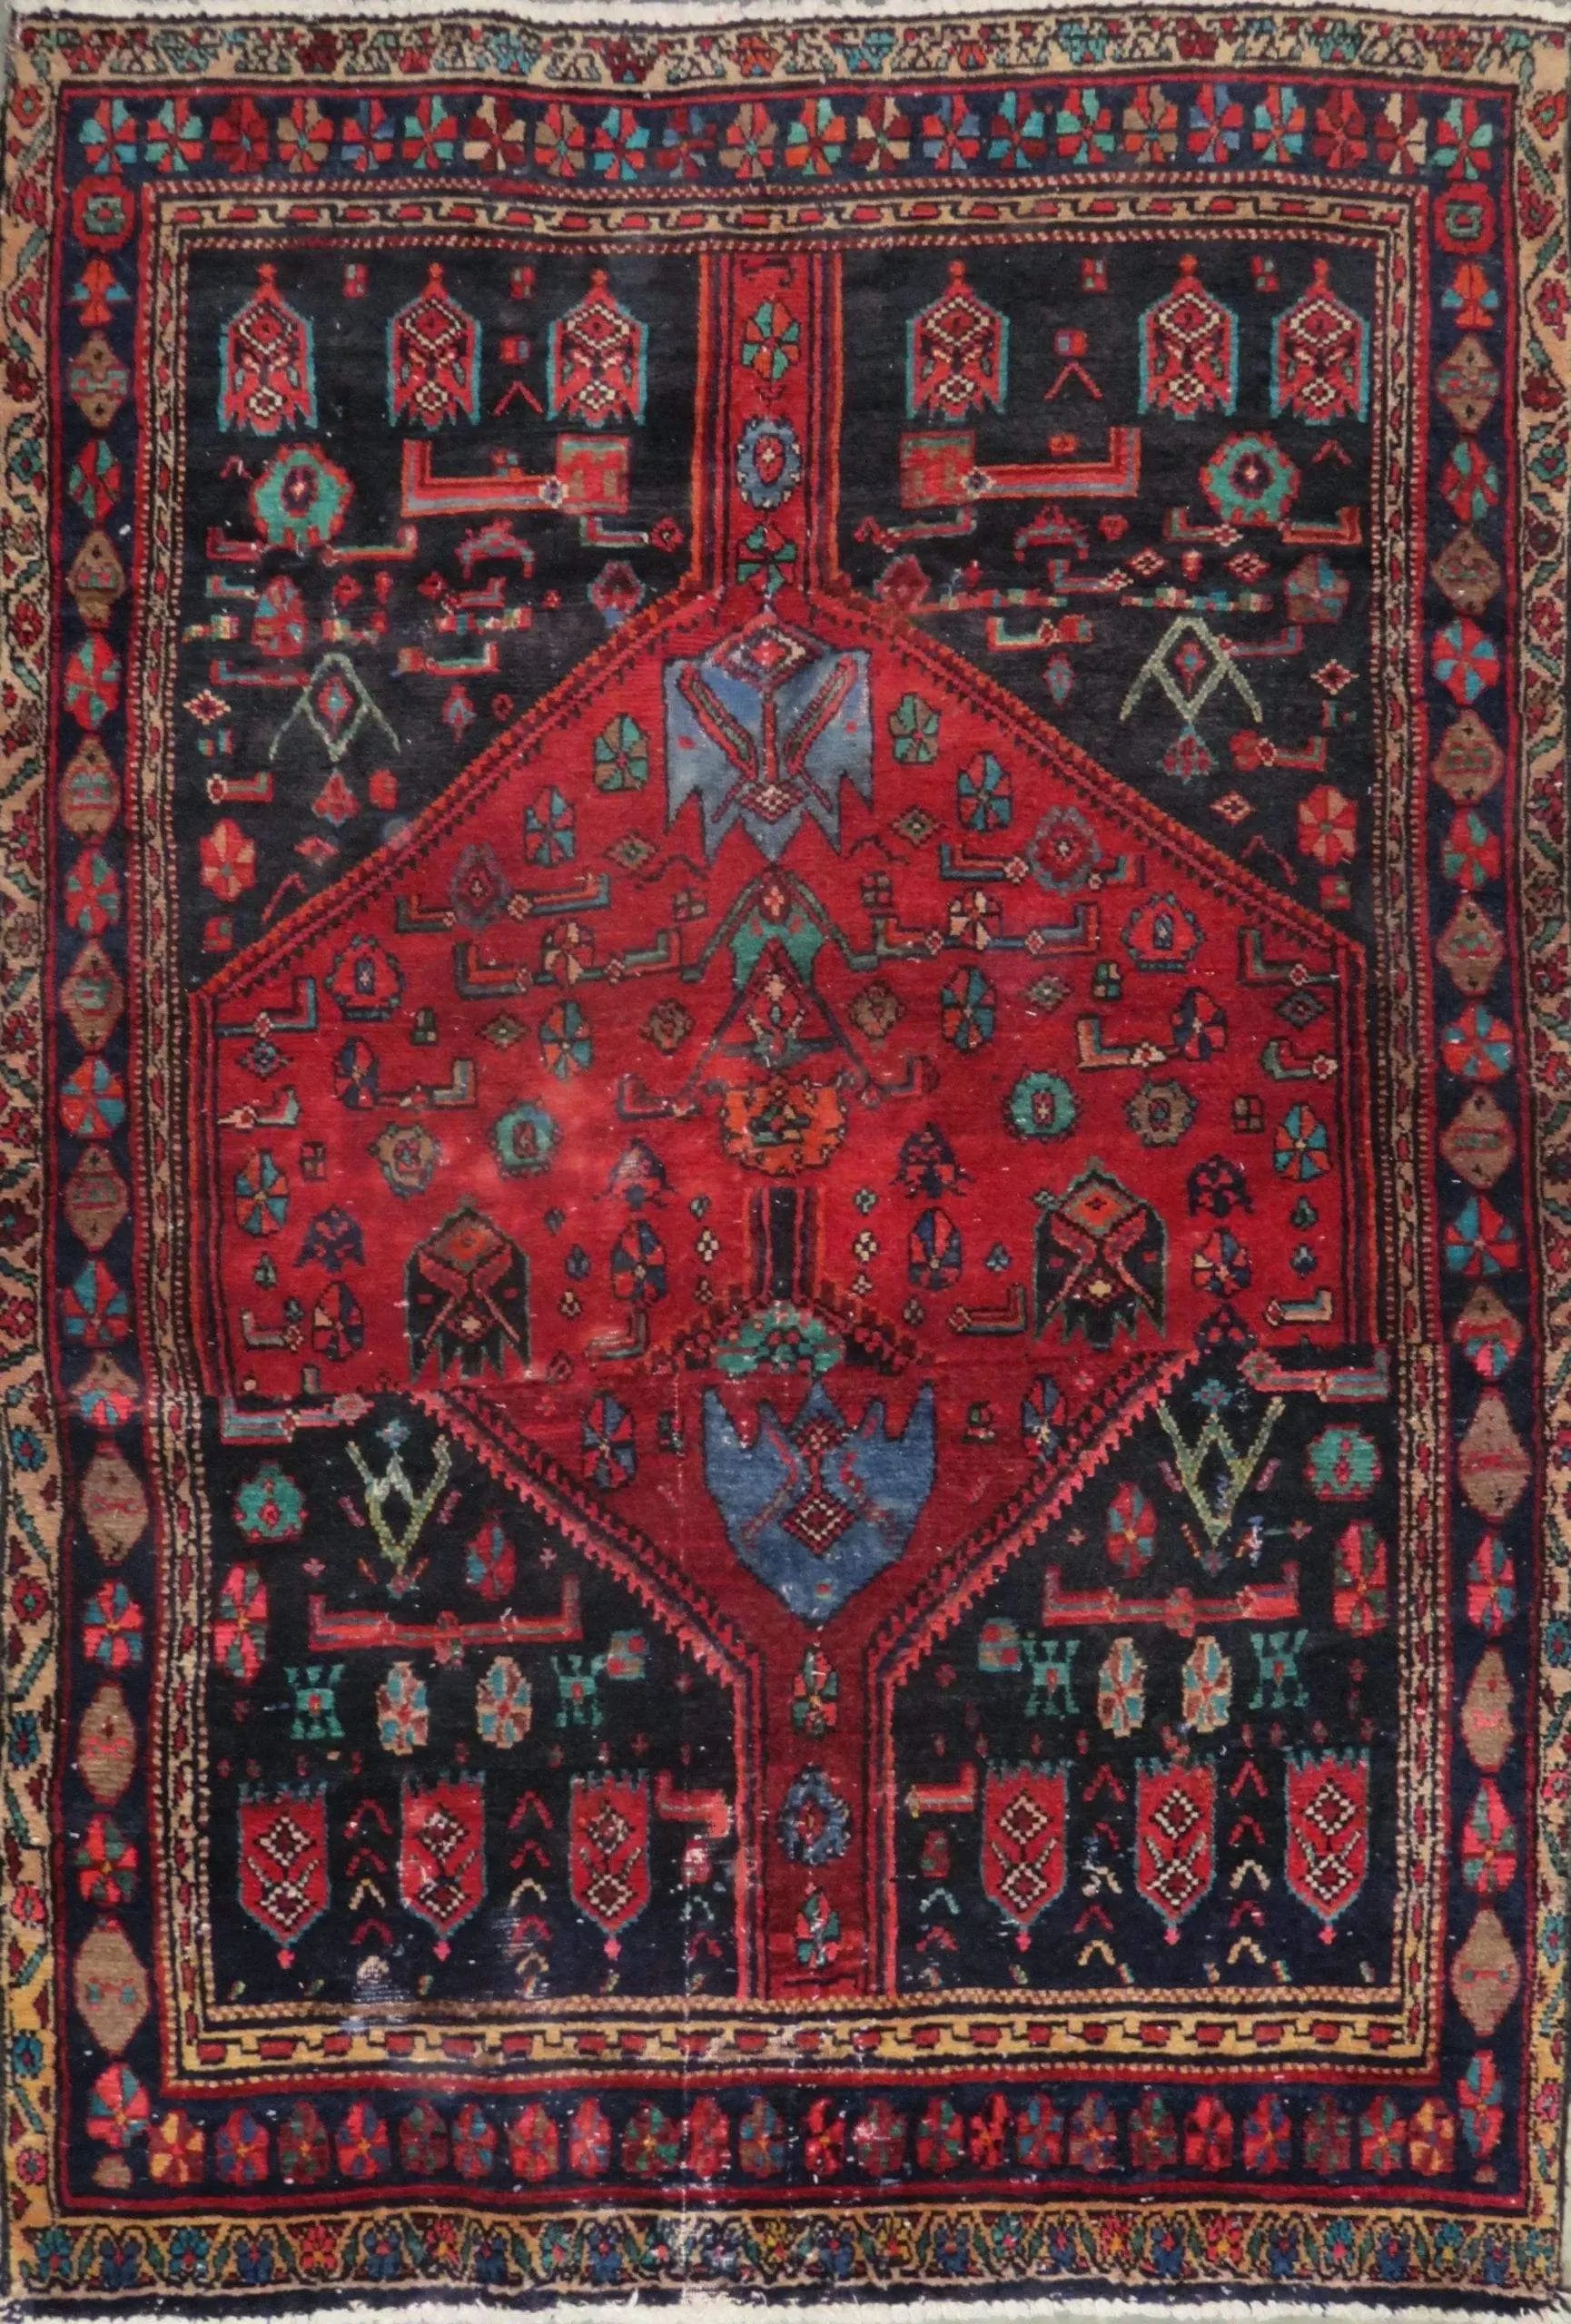 Hand-Knotted Persian Wool Rug _ Luxurious Vintage Design, 6'0" x 4'2", Artisan Crafted